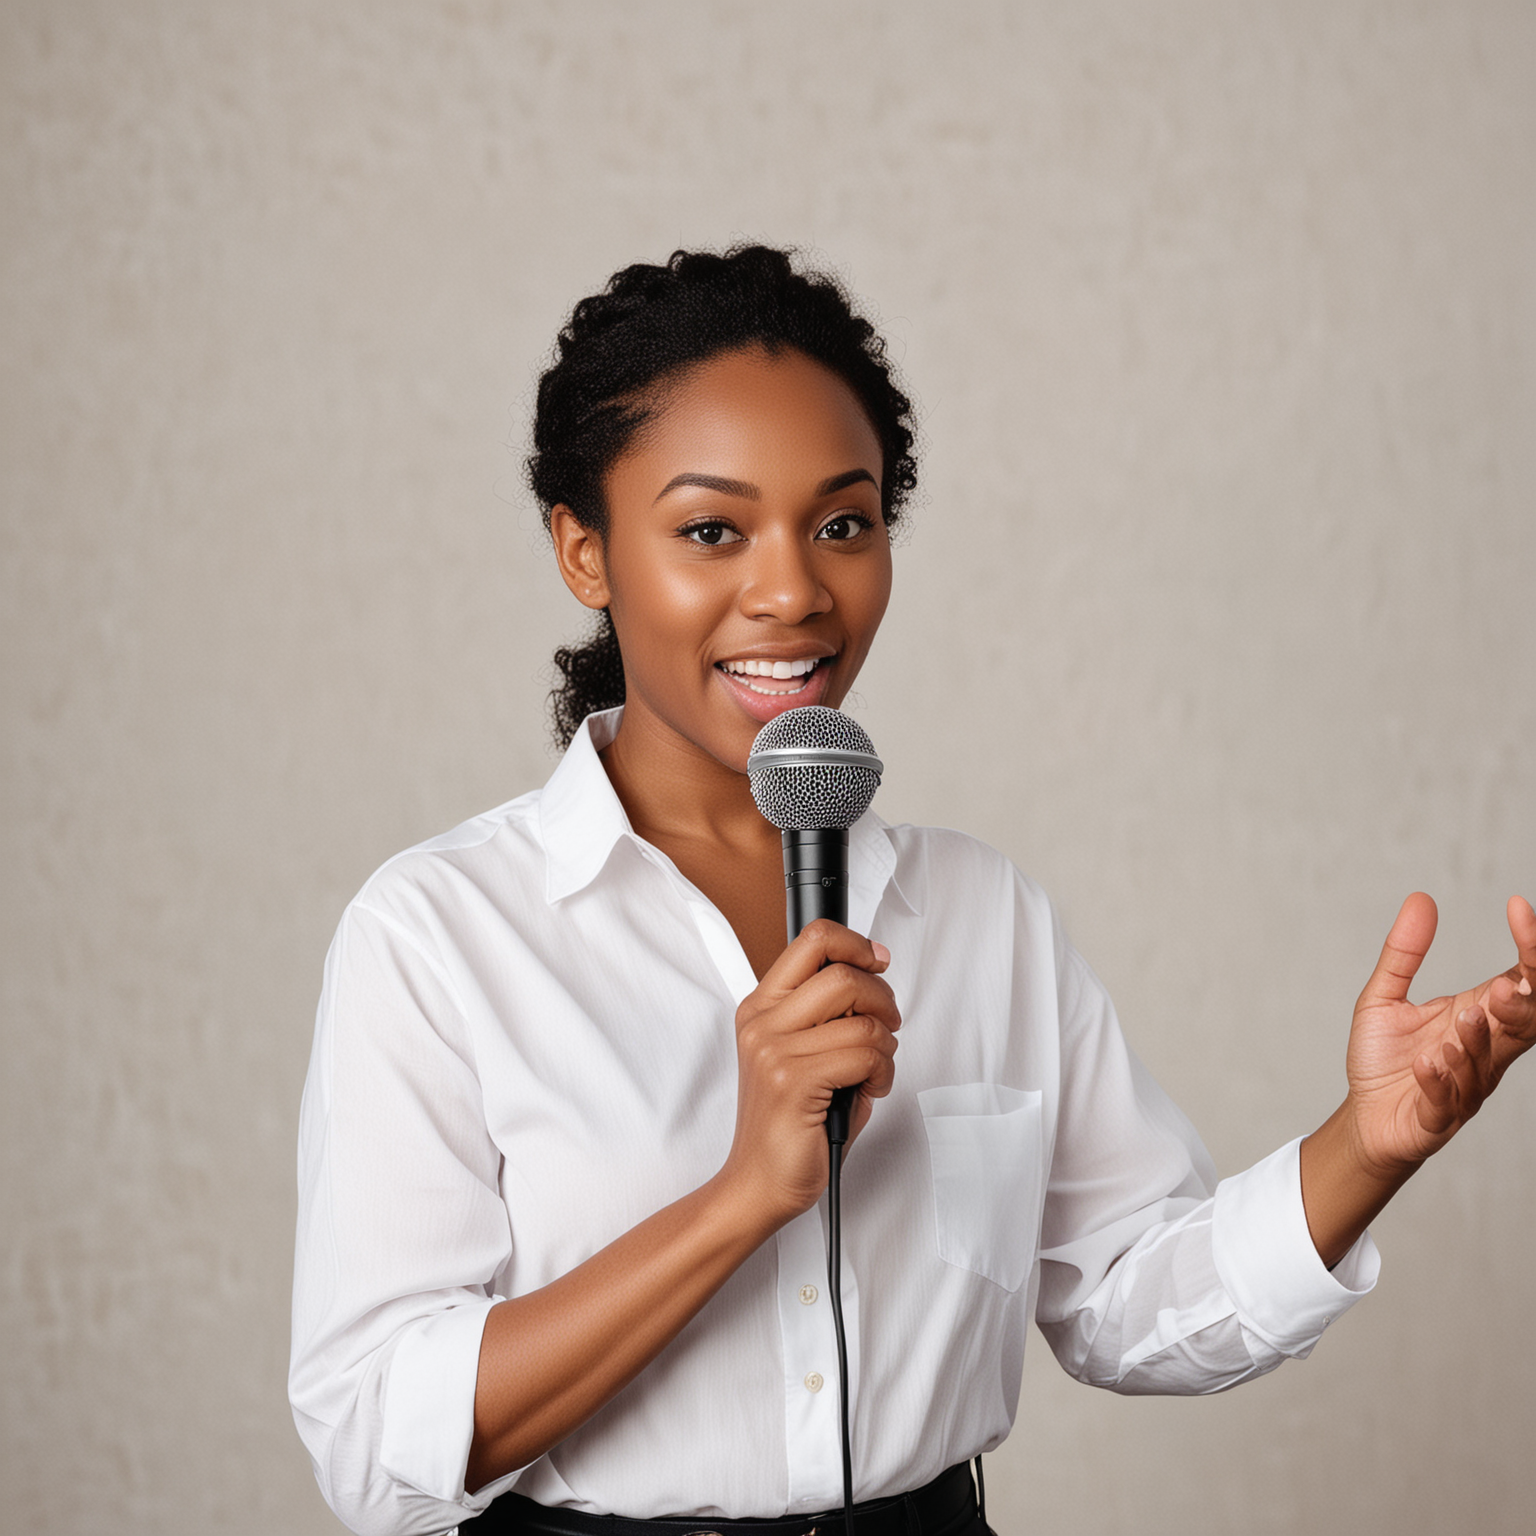 Confident Black Woman Speaking into Microphone in Elegant White Shirt